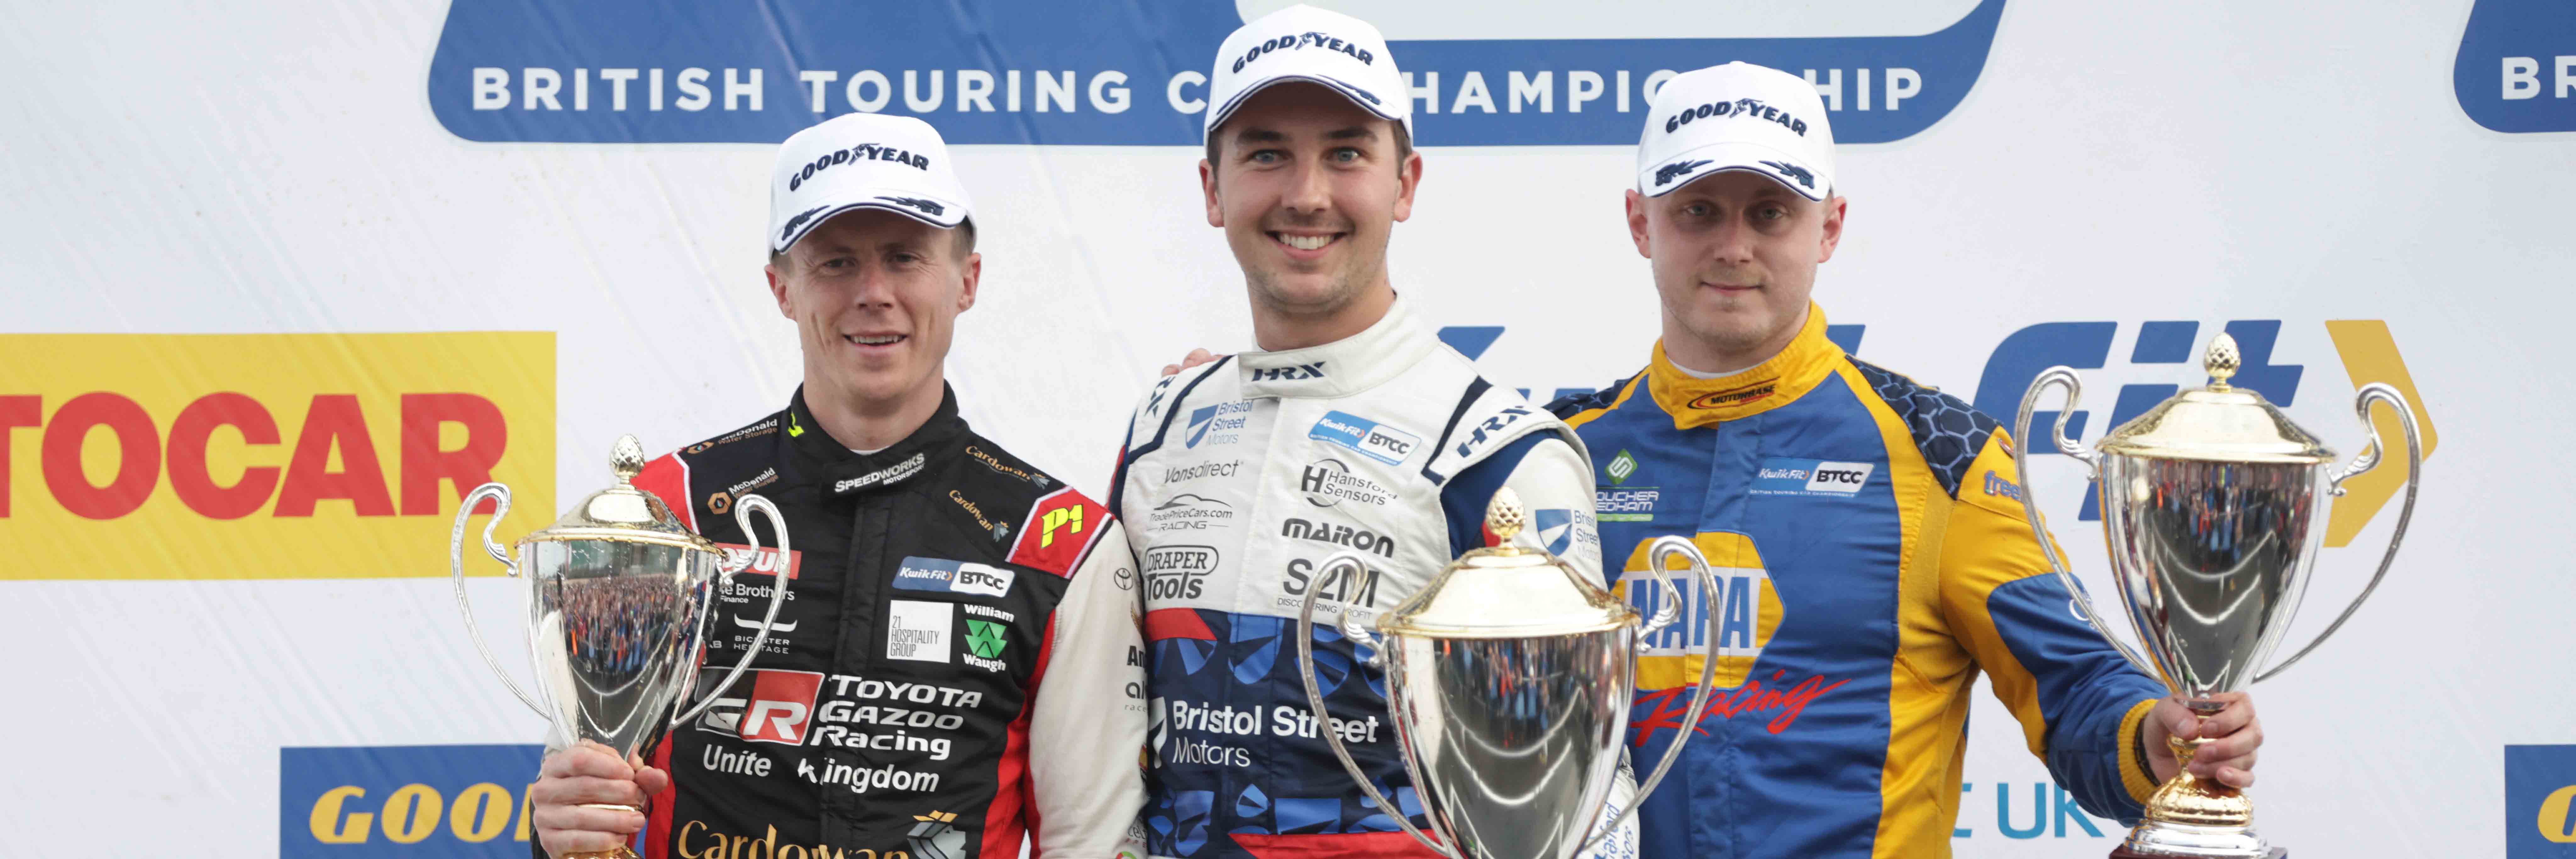 The BTCC 2022 Silverstone Race 3 podium with Tom Ingram, Rory Butcher and Ash Sutton